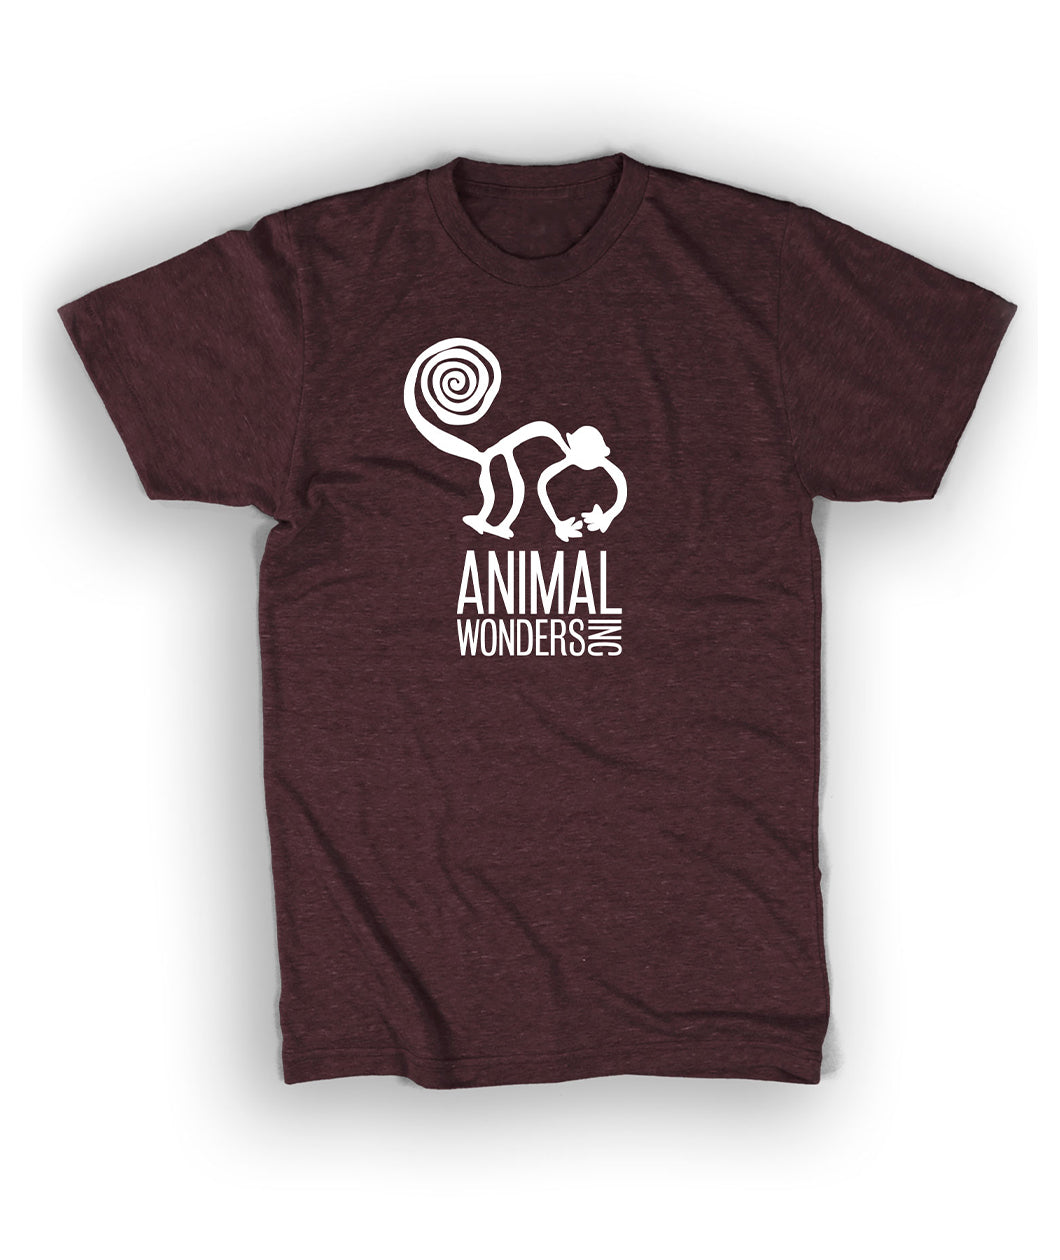 Dark maroon shirt with Animal Wonders in center of shirt in white. Logo is of cartoon silhouette drawing of monkey with spiral tail is above “Animal Wonders INC” with each word all caps, sans serif font, and varying sizes. INC is on its side at end of the word Wonders, both are below “Animal